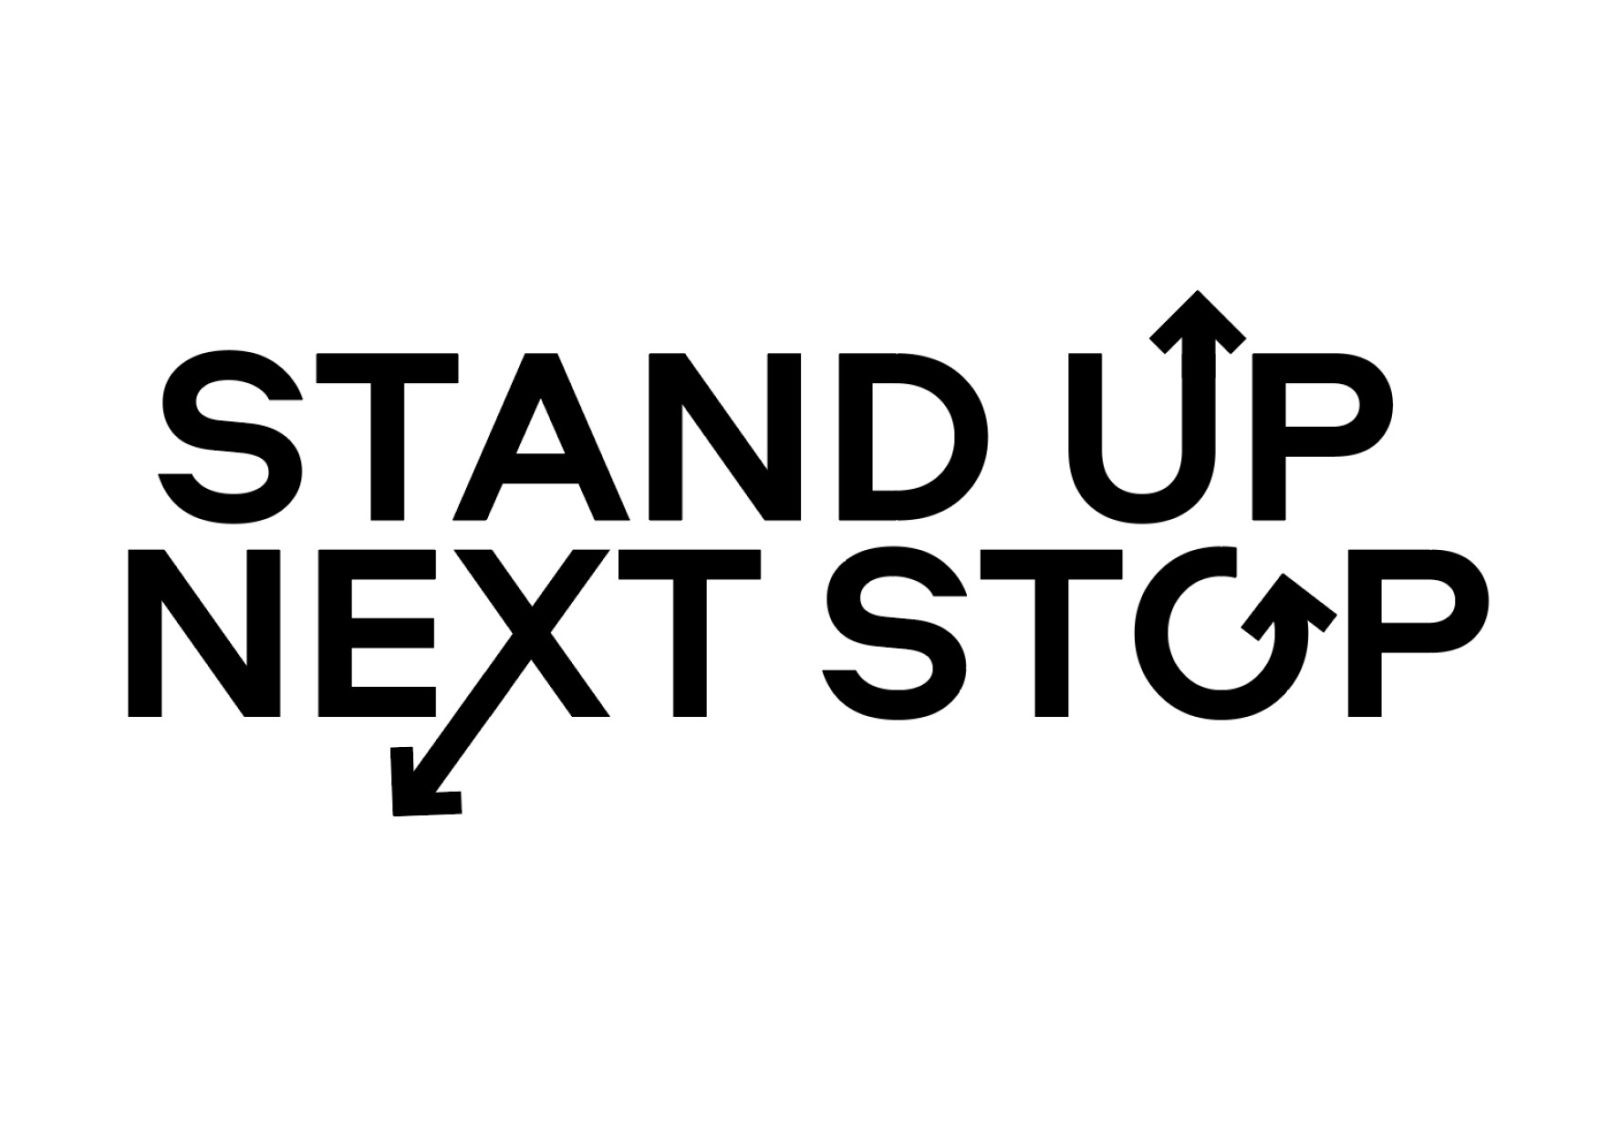 Student Concept Branding for the Stand-Up Subway Concert